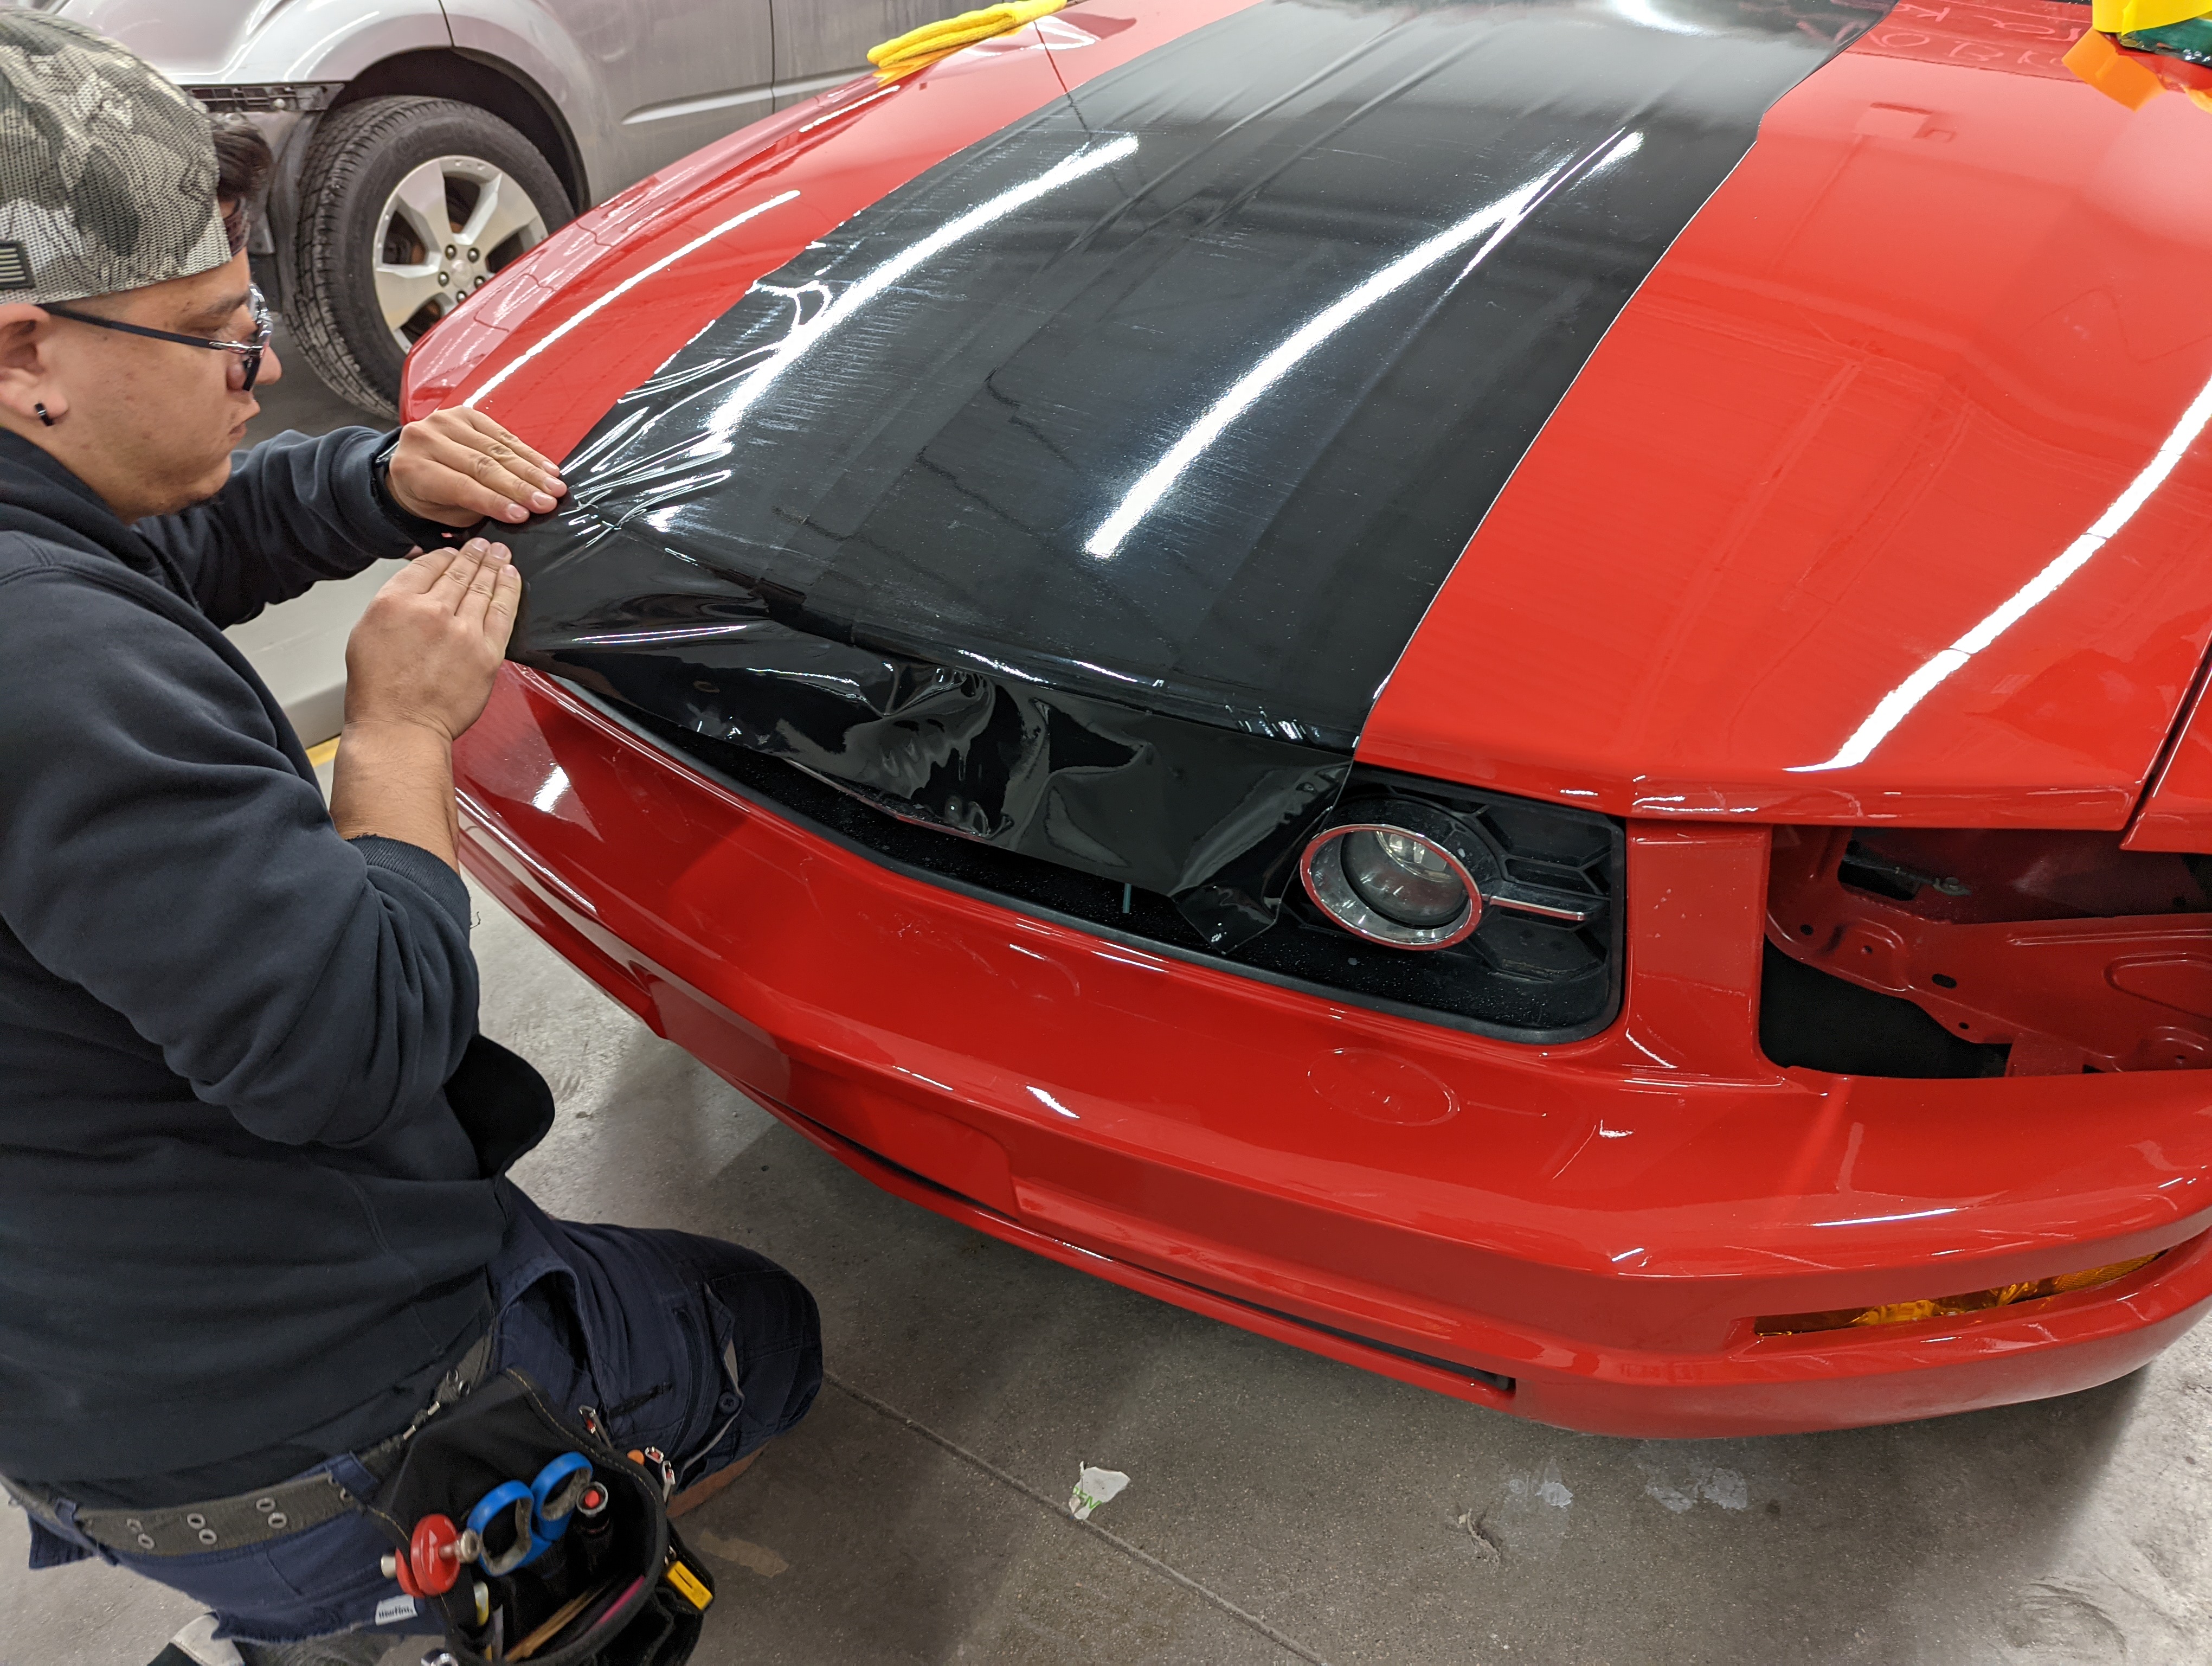 2006 Ford Mustang Vinyl Stripes. Placing the first sheet of vinyl on hood.